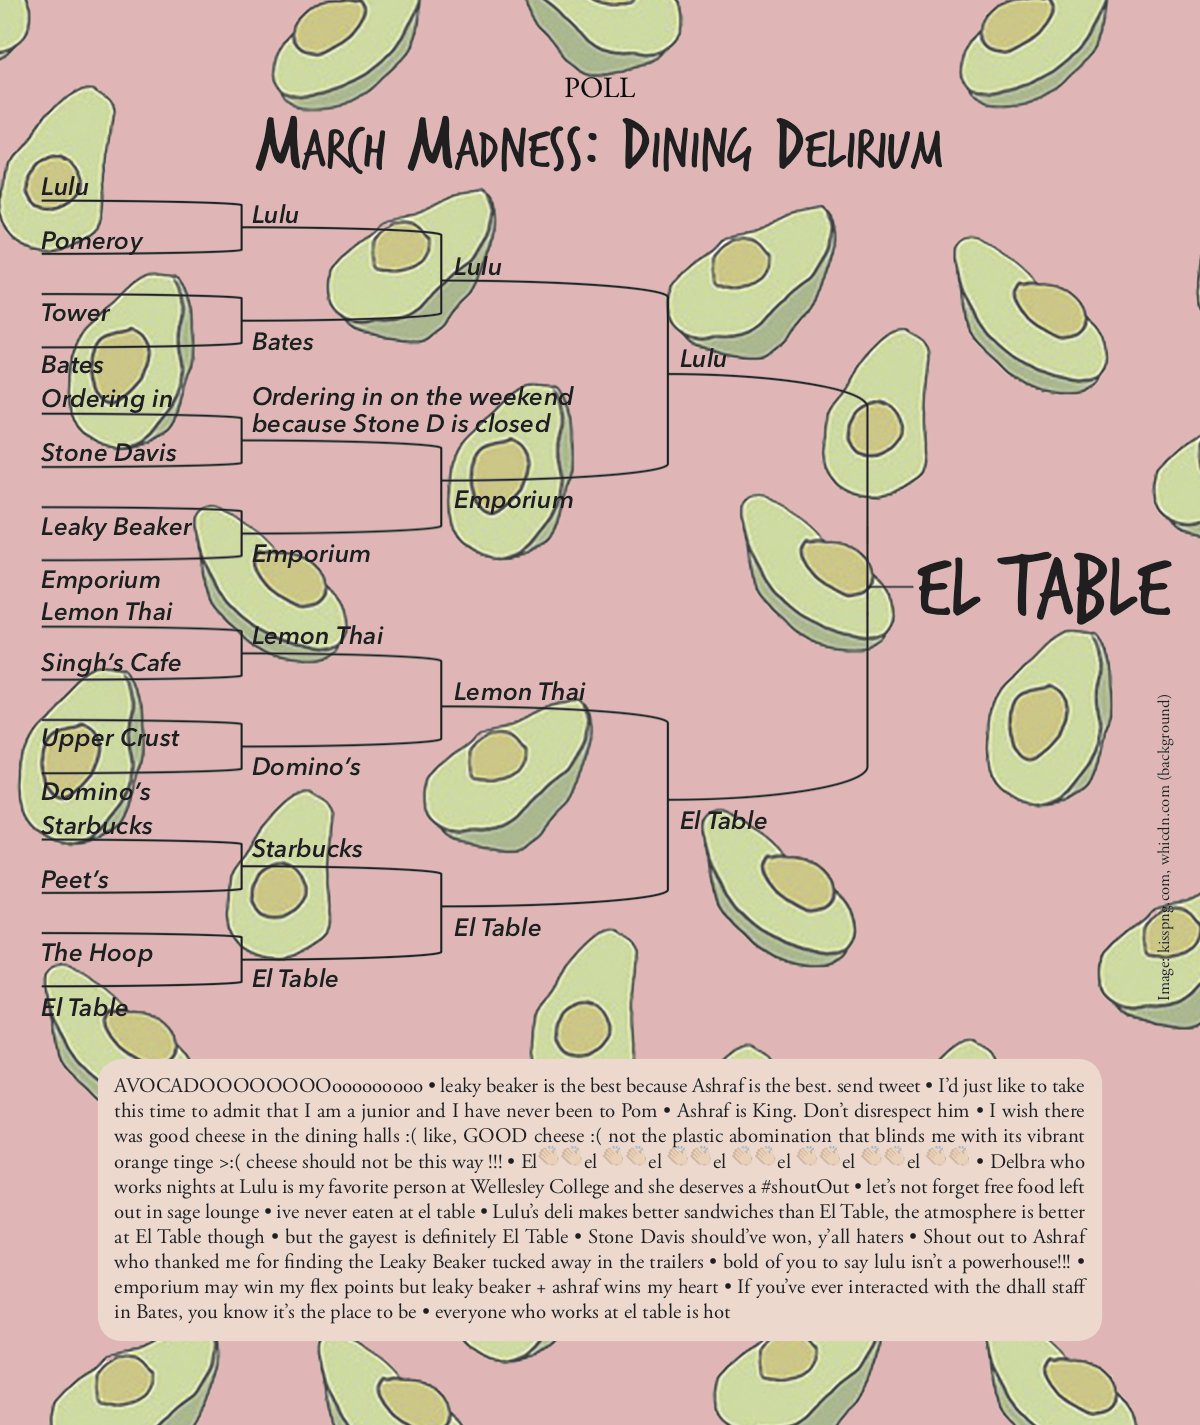 March Madness, Dining Delirium